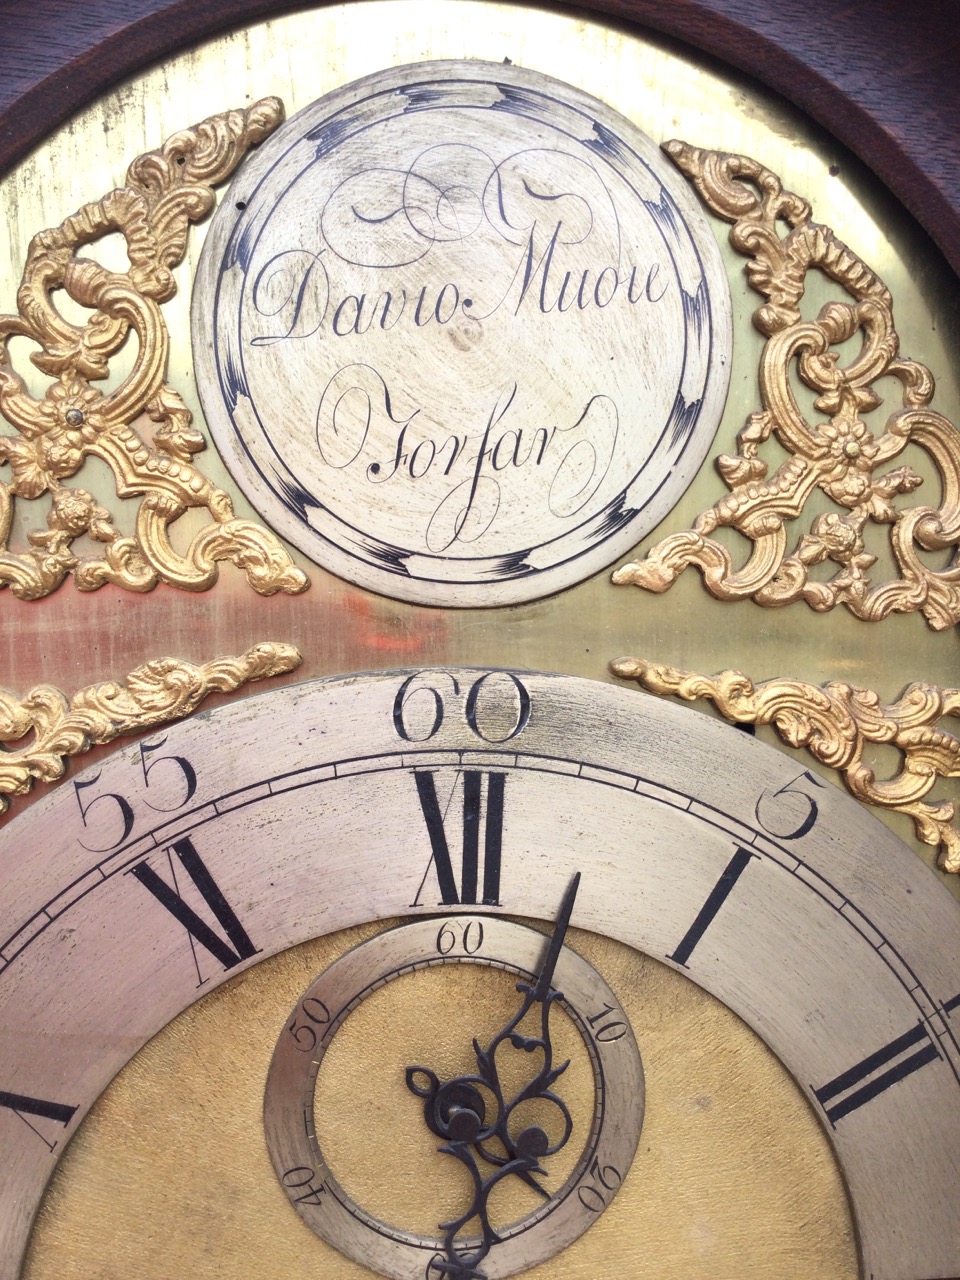 A Georgian oak longcase clock by David Mudie of Forfar, with arched cornice above a brass dial - Image 3 of 3